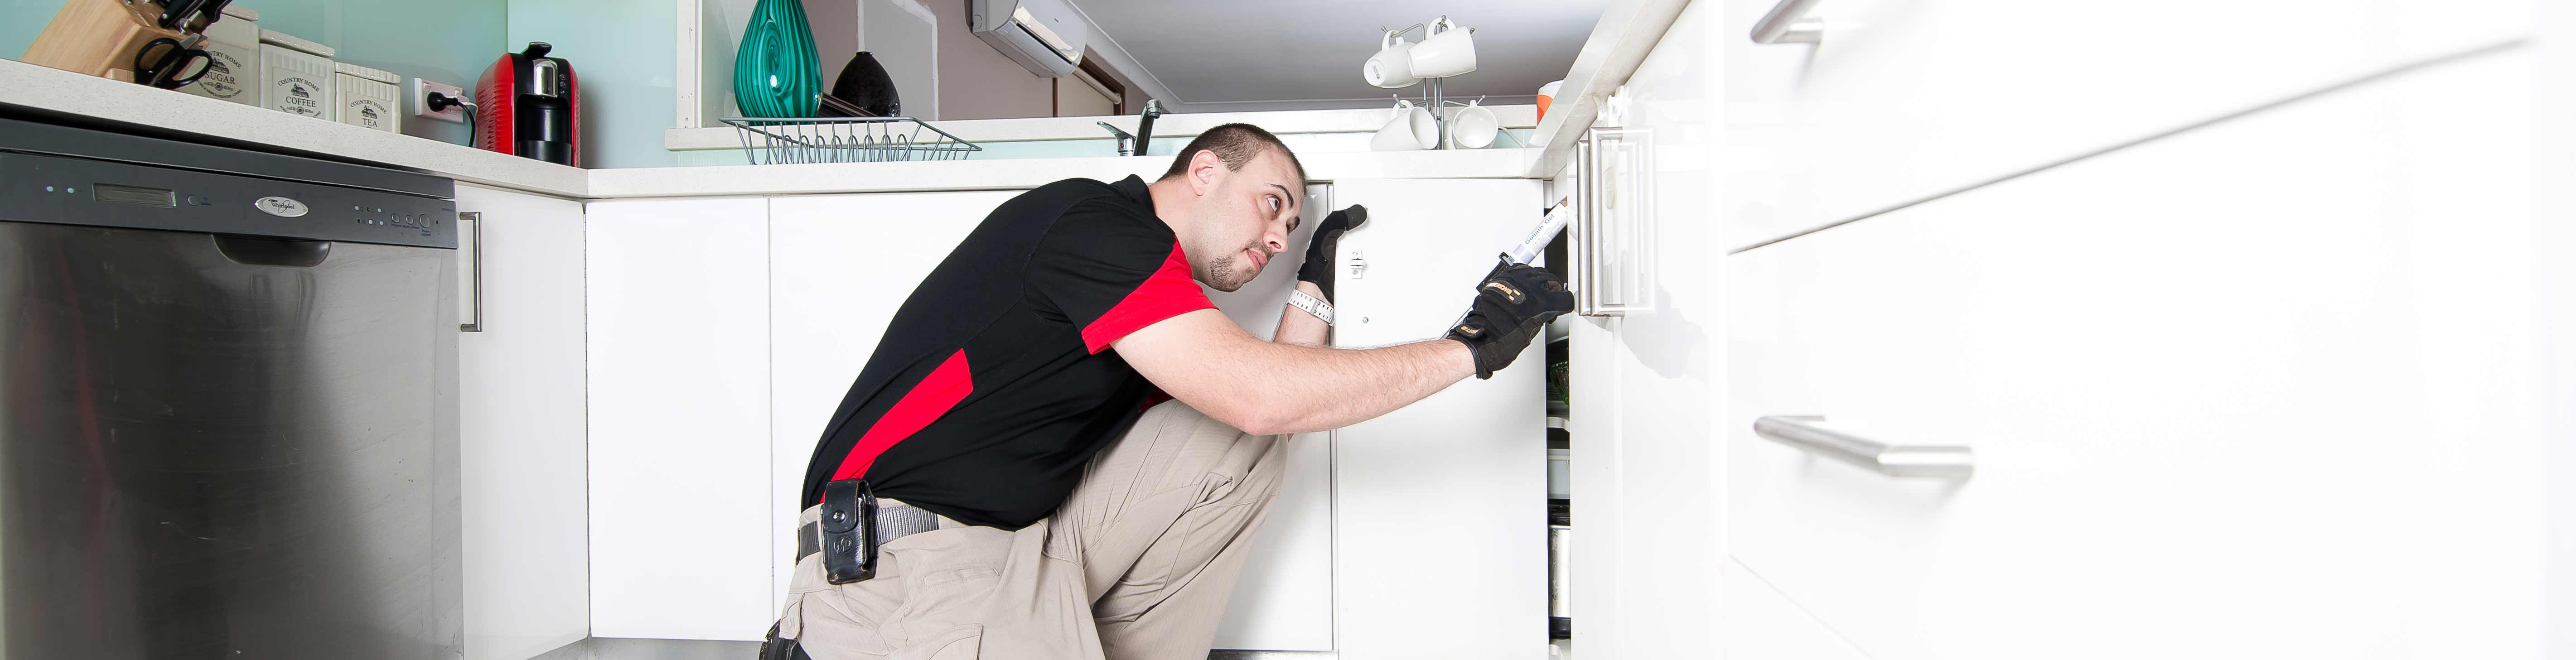 residential pest control service header image